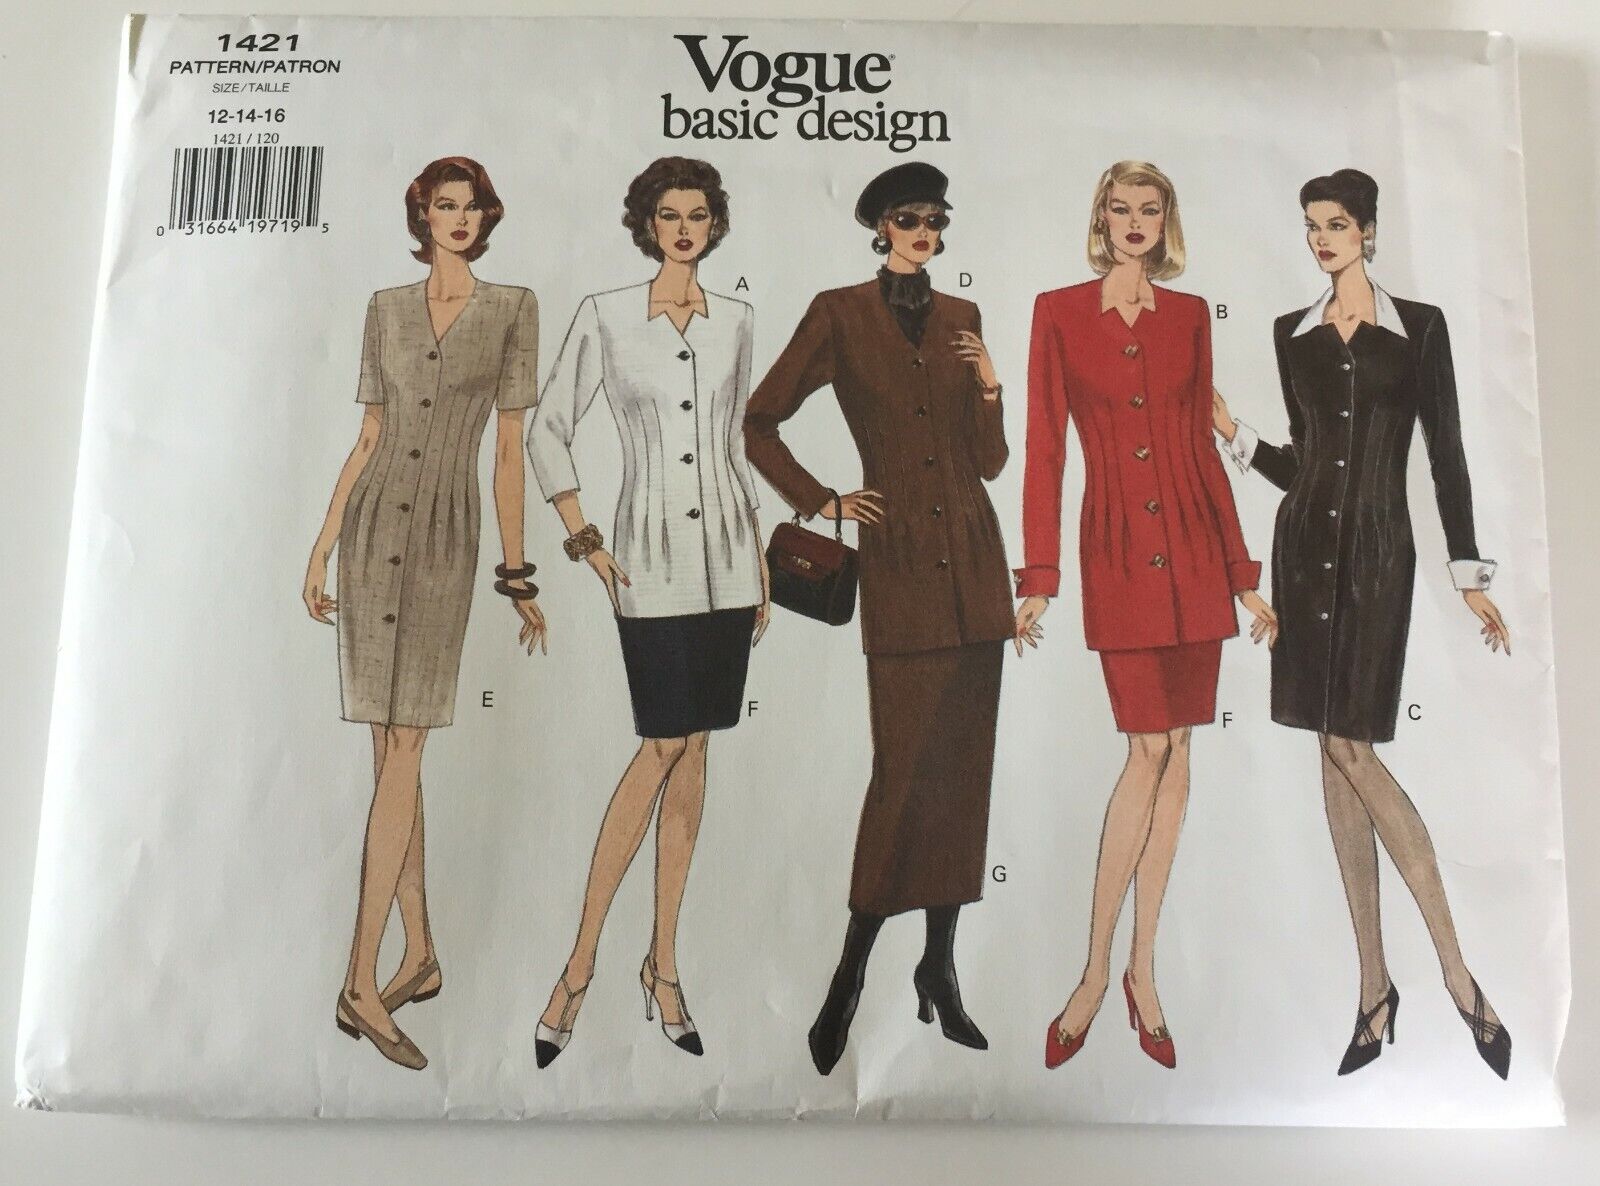 Vogue 1421 Sewing Pattern Misses Sizes 12 - 16 DRESS TOP and SKIRT loose Fitting